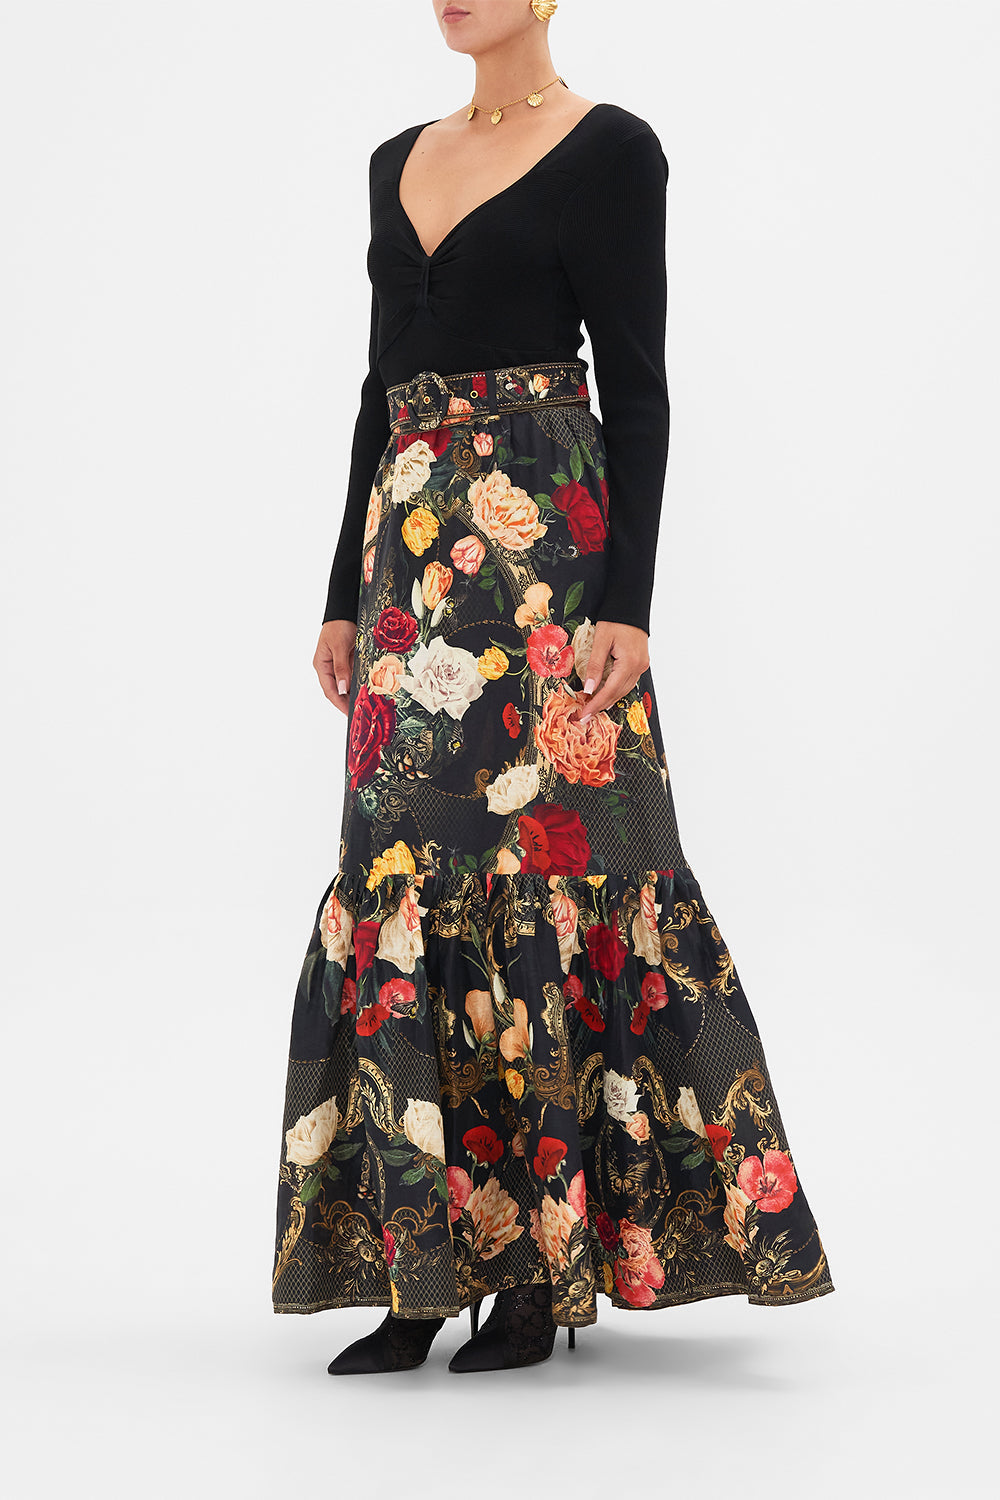 CAMILLA Black Skirt with Deep Hem Frill and Belt in Magic in the Manuscripts